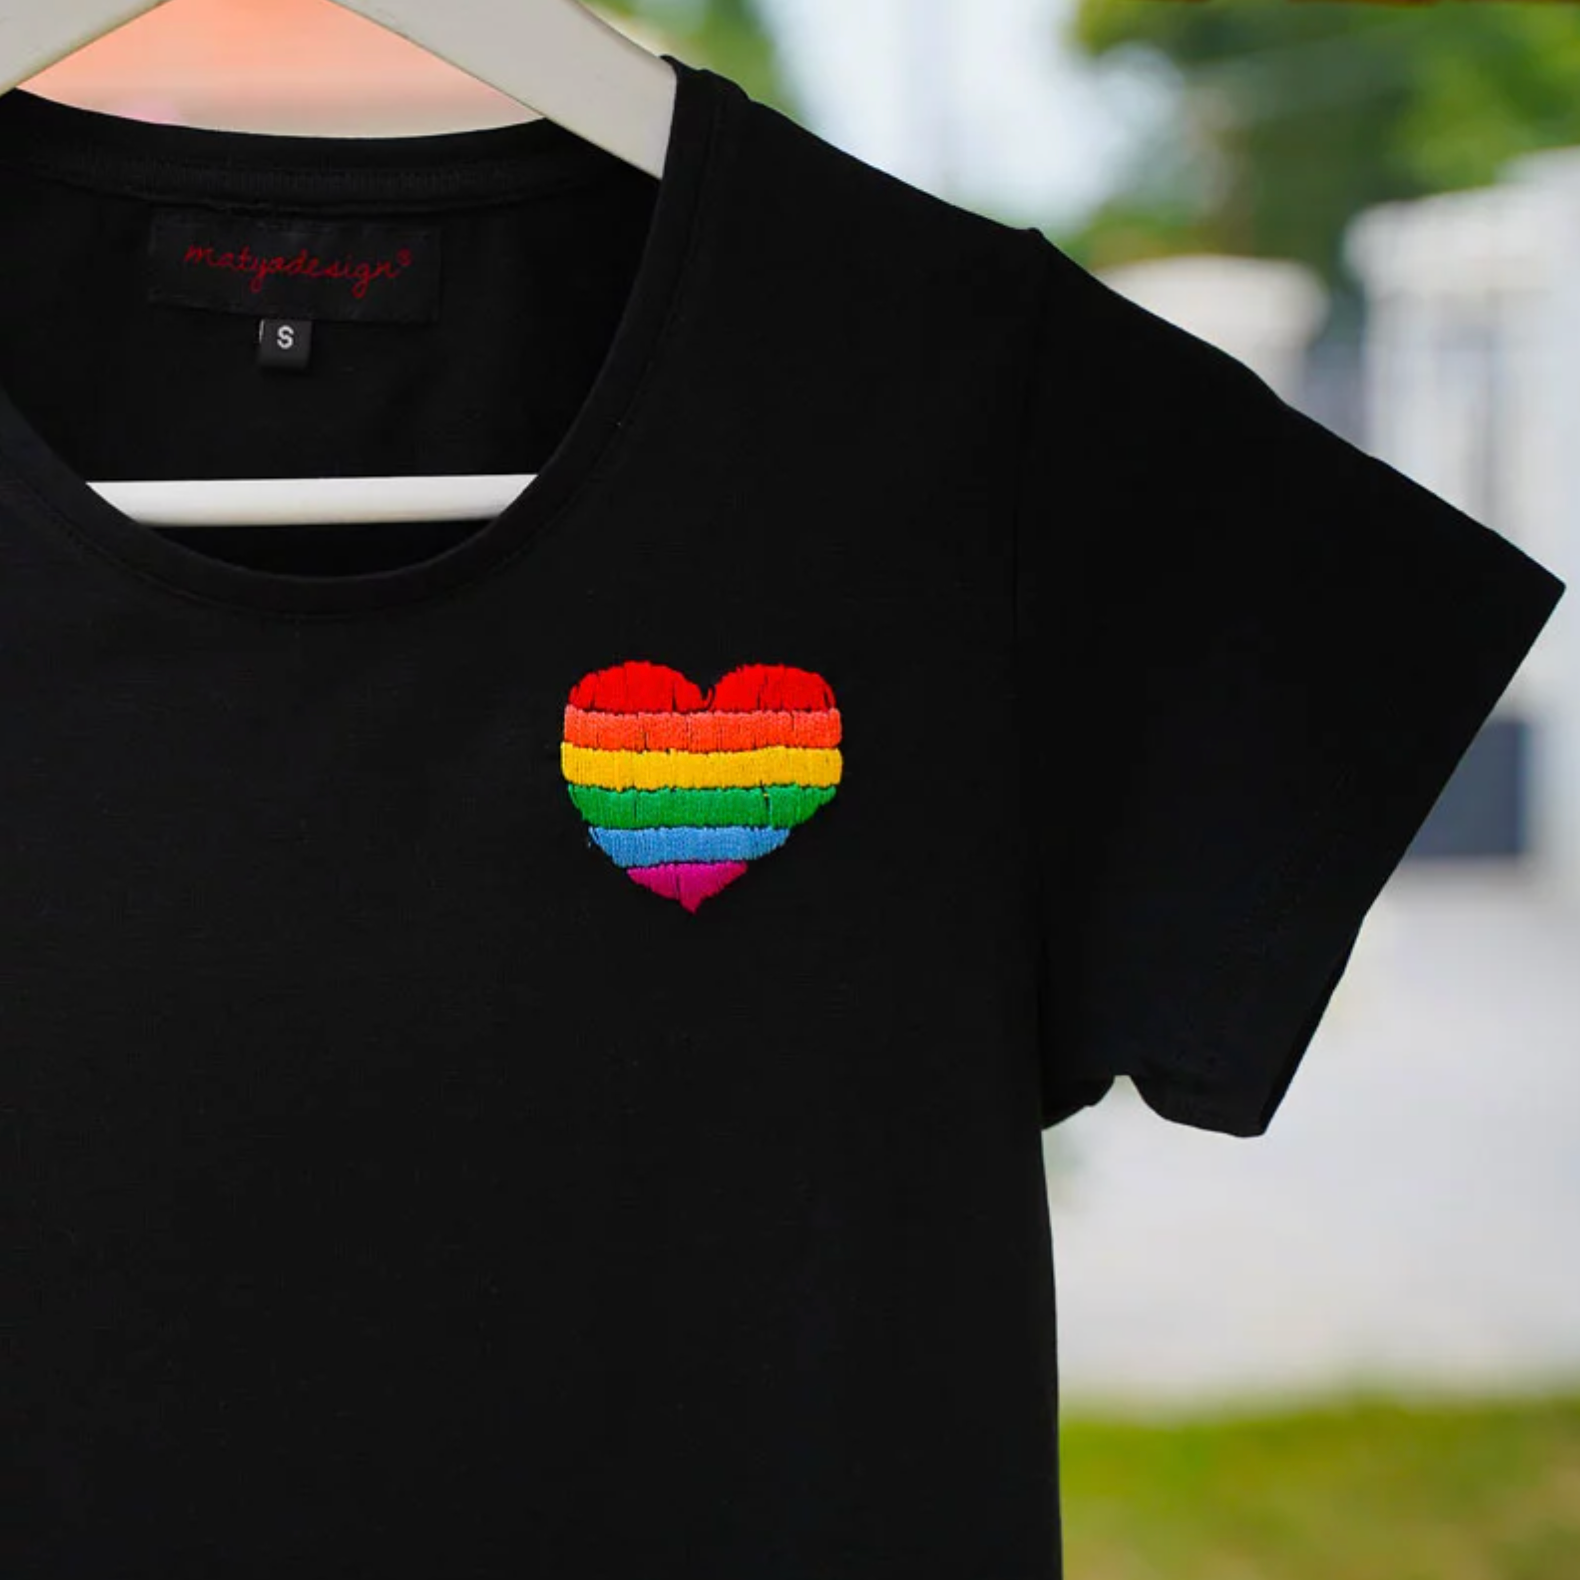 matyódesign t-shirt, hand-embroidered with a rainbow heart pattern